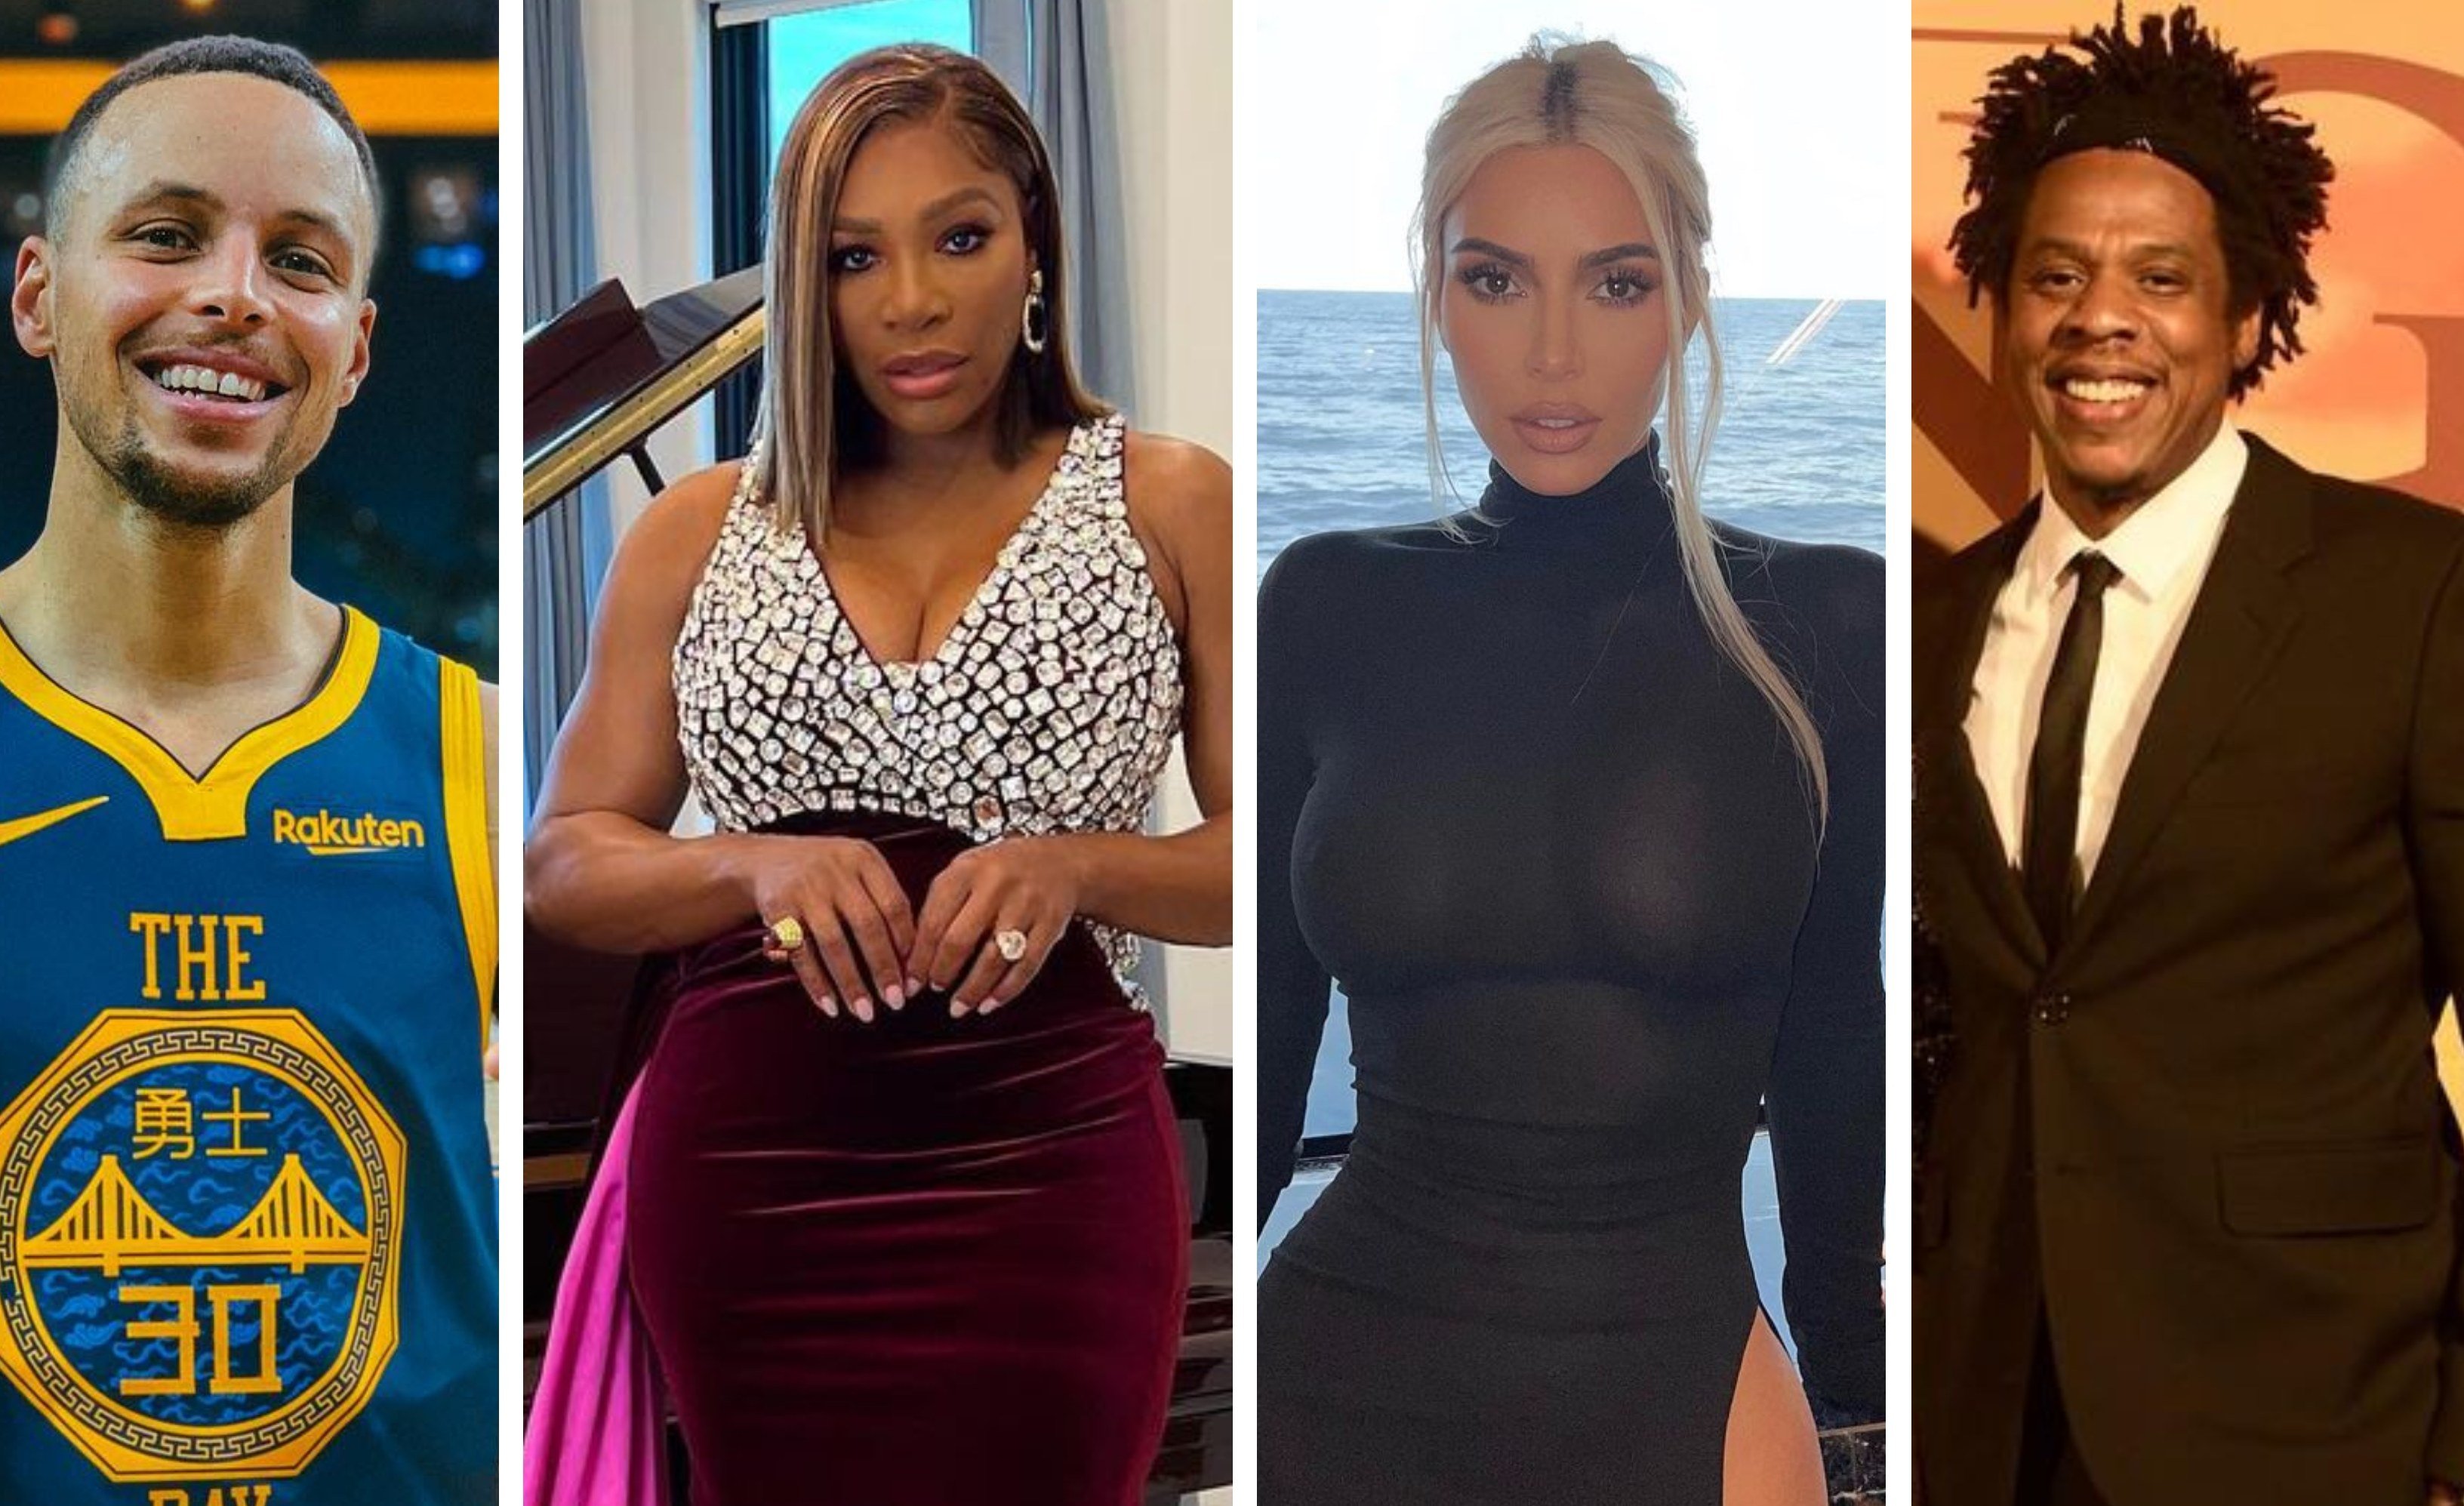 Stephen Curry, Serena Williams, Kim Kardashian and Jay-Z all run investment firms. Photos: @stephencurry30, @serenawilliams, @kimkardashian, @beyonce/Instagram